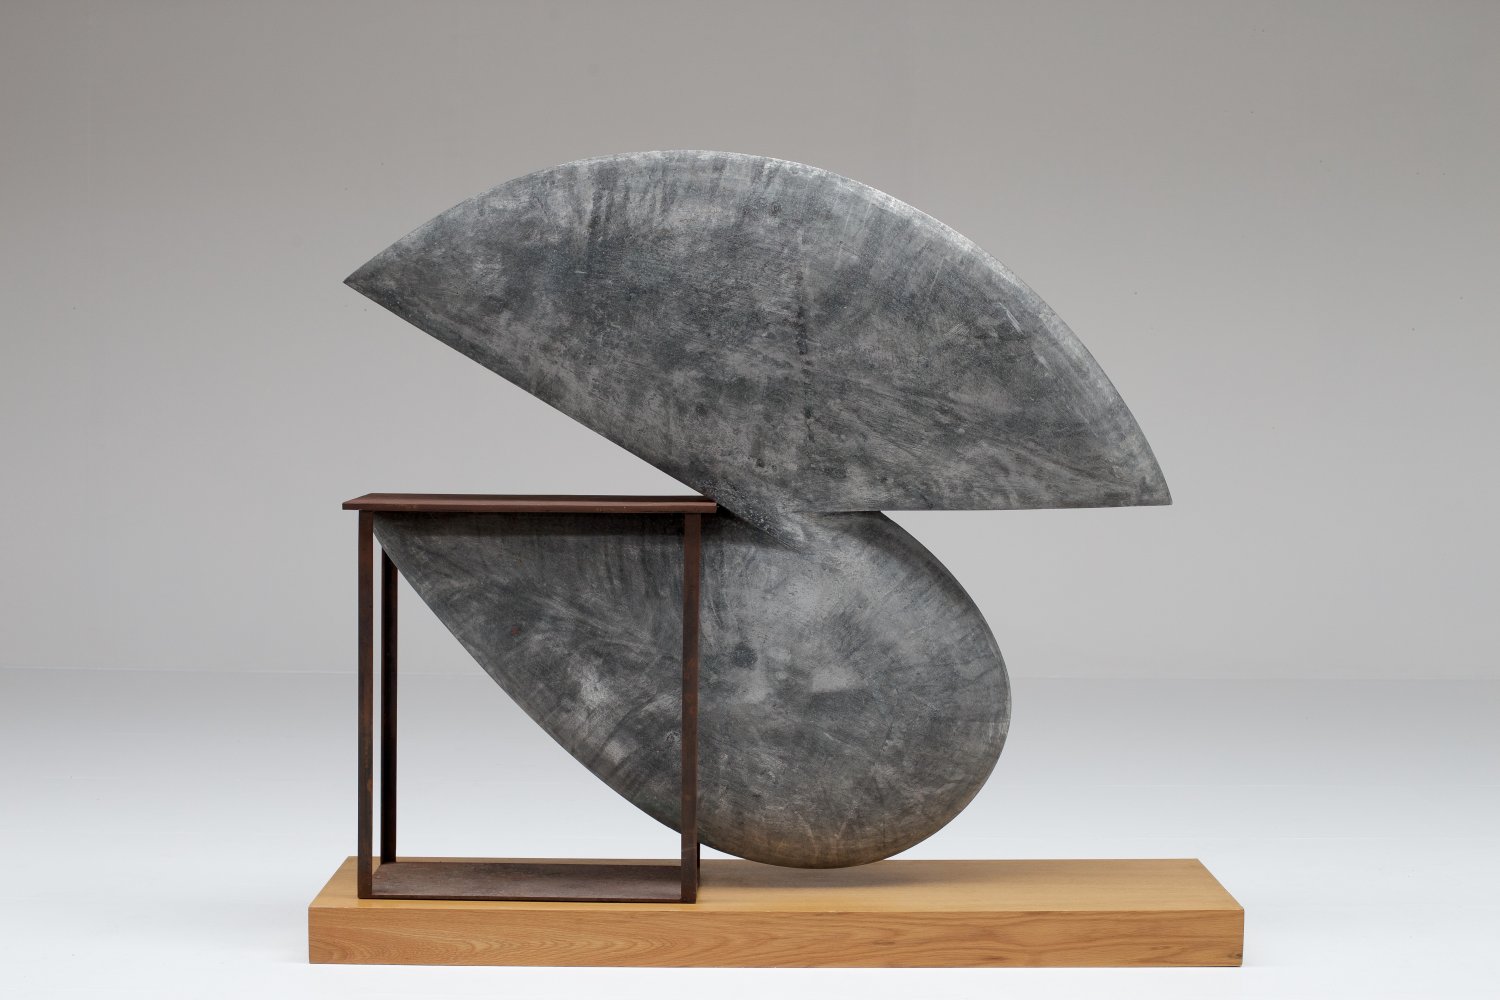 Sculpture by Win Knowlton